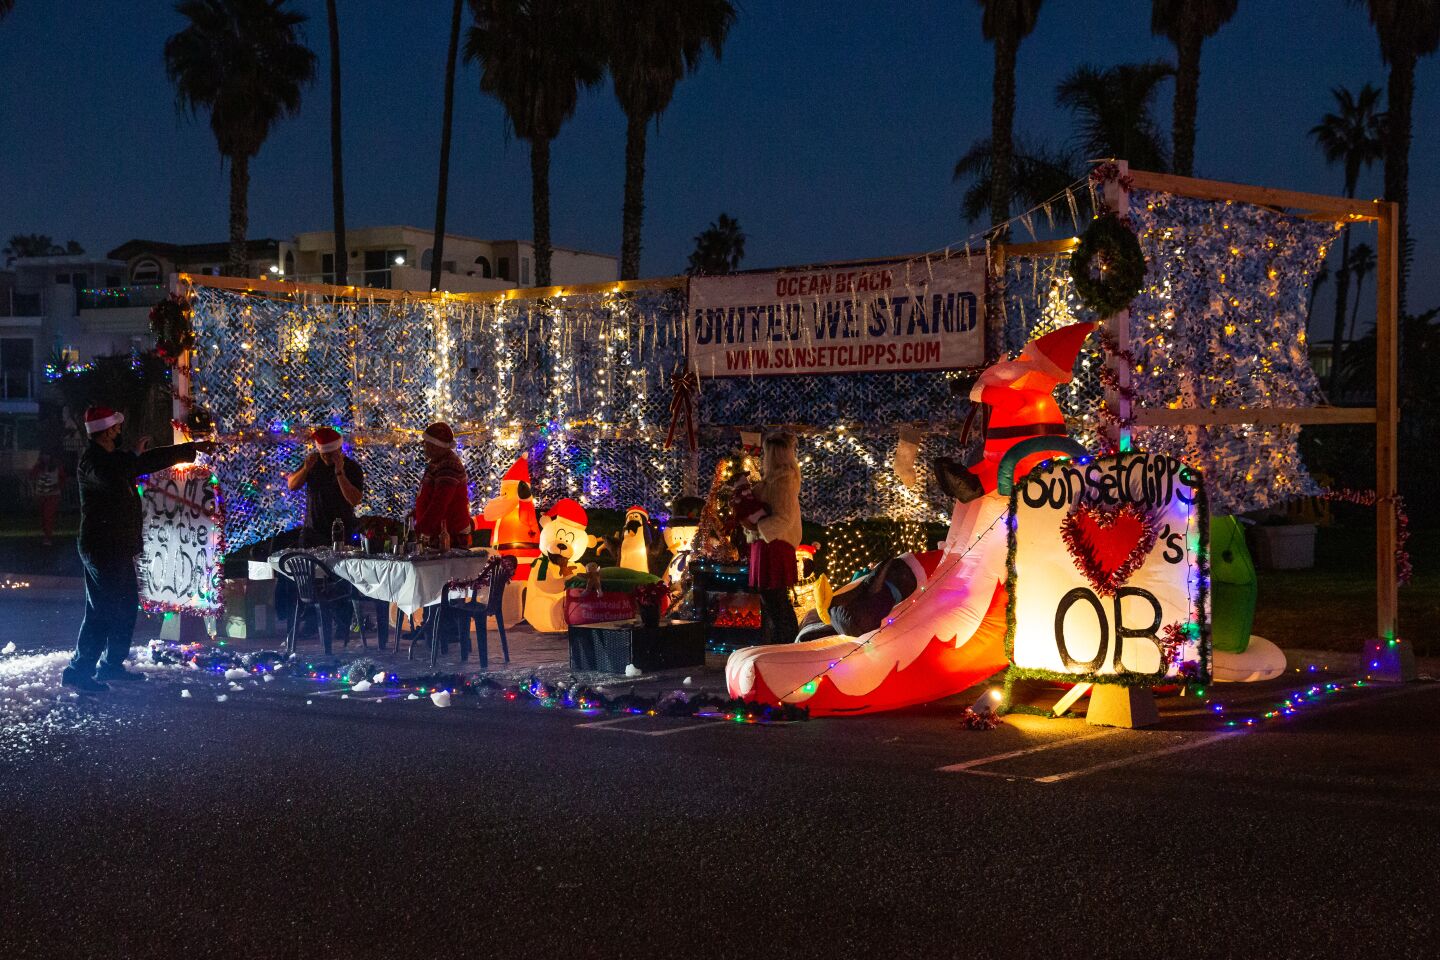 Sunset Clipps barbershop/hair salon turns out for the Ocean Beach Holiday Parade on Dec. 5 in the Dog Beach parking lot.